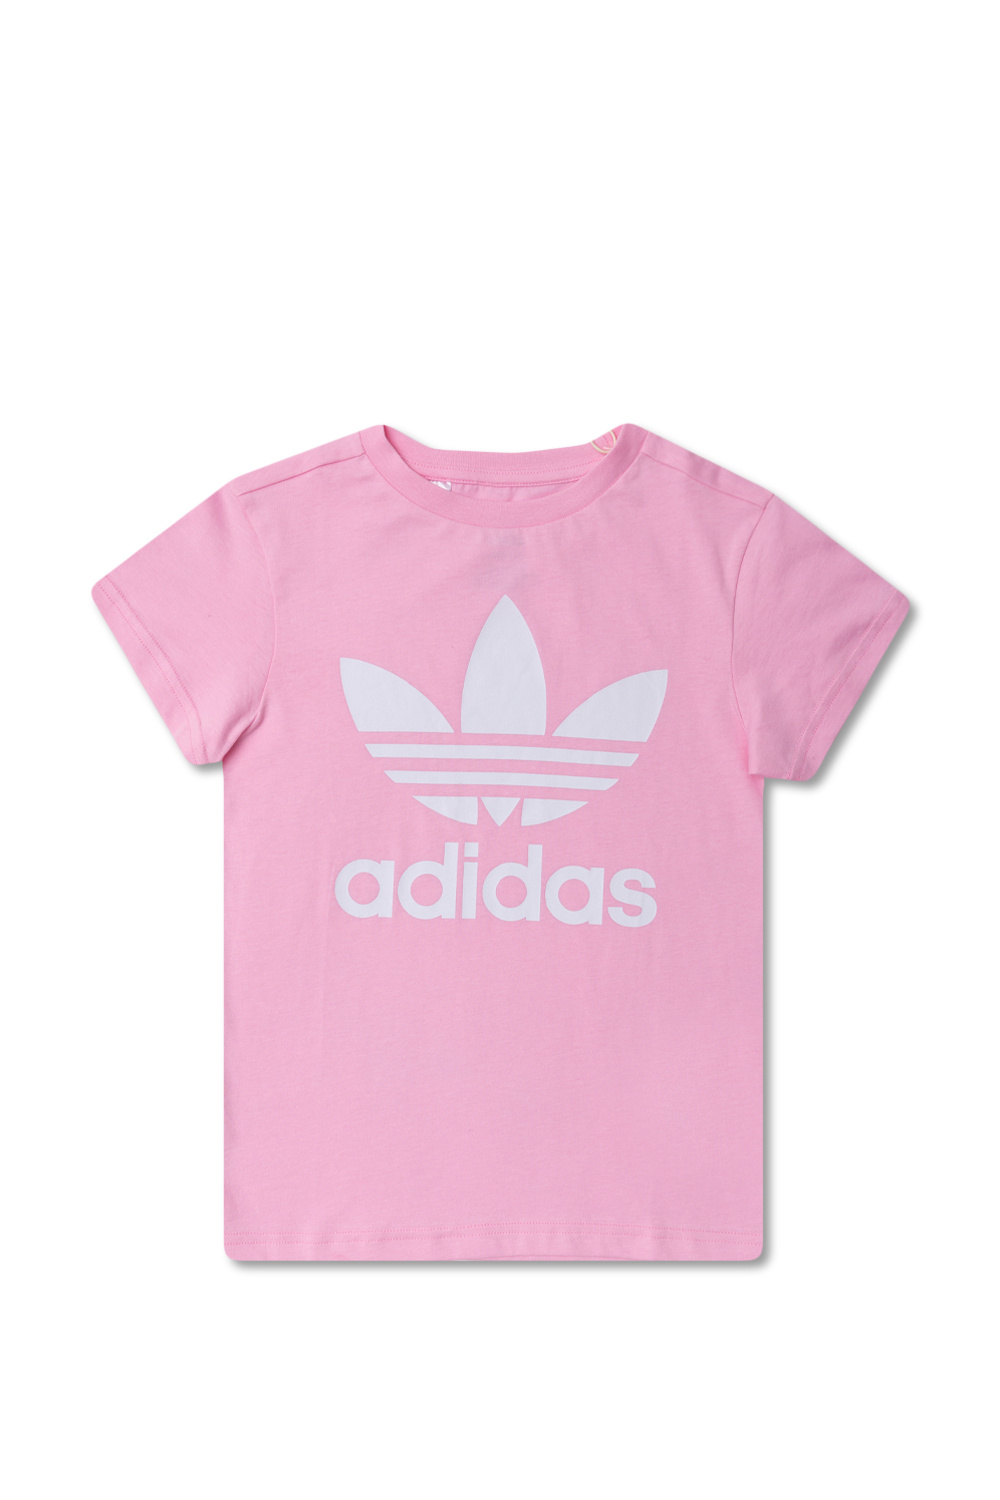 ADIDAS cheap server - in cheap shirt - with today Kids status order location list T logo adidas Pink IetpShops - Canada